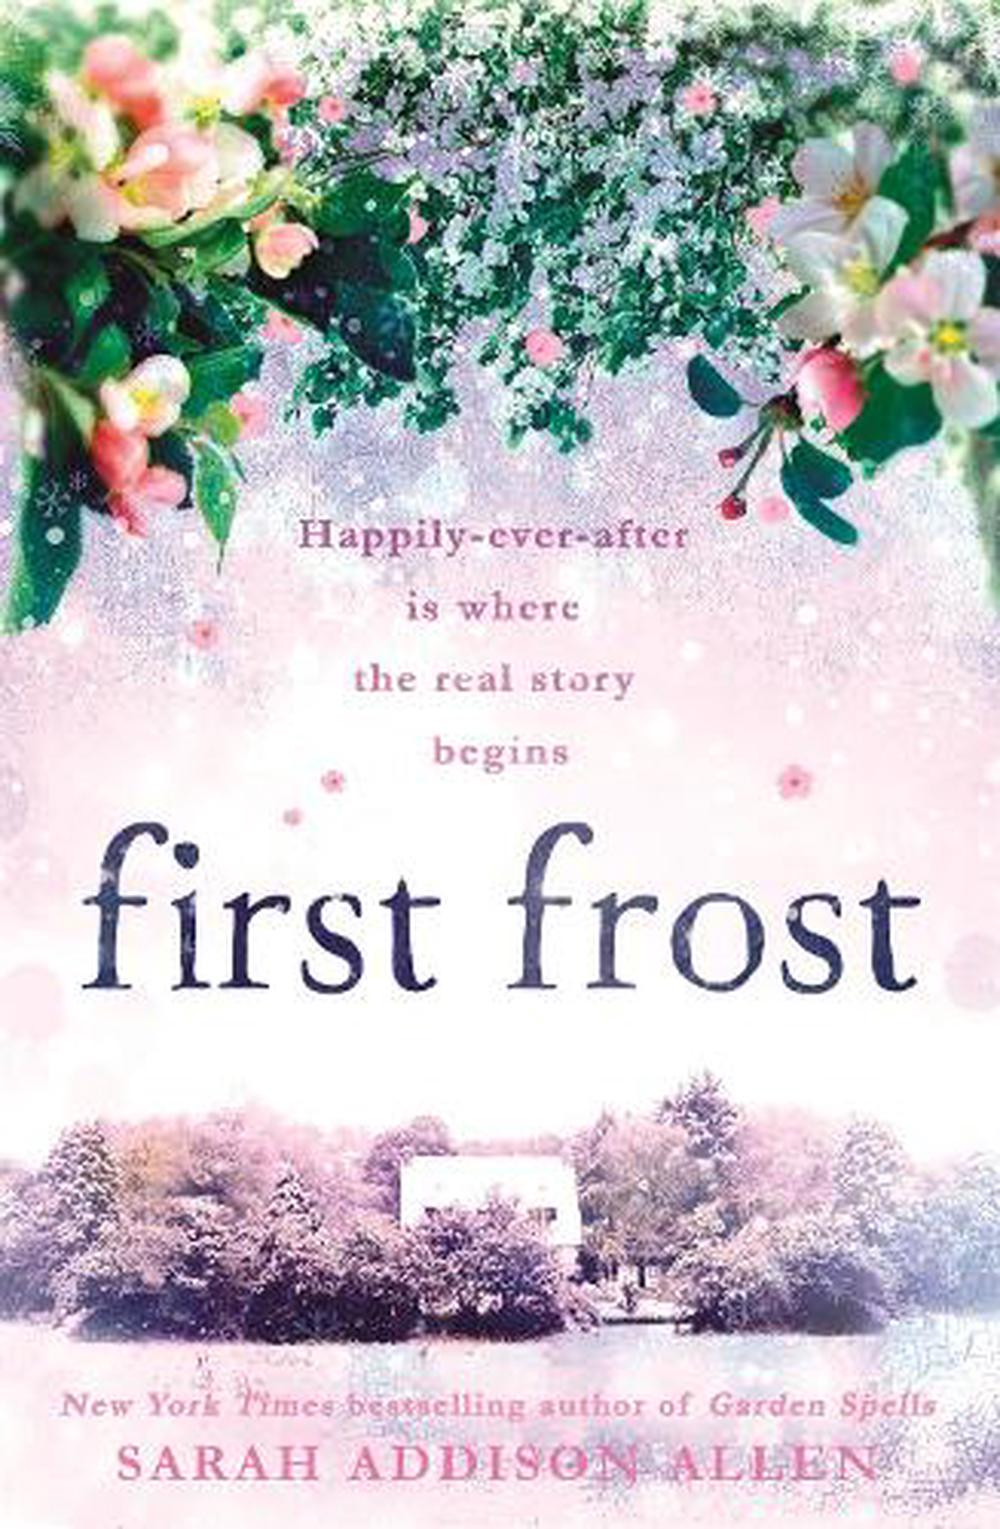 first frost sarah addison